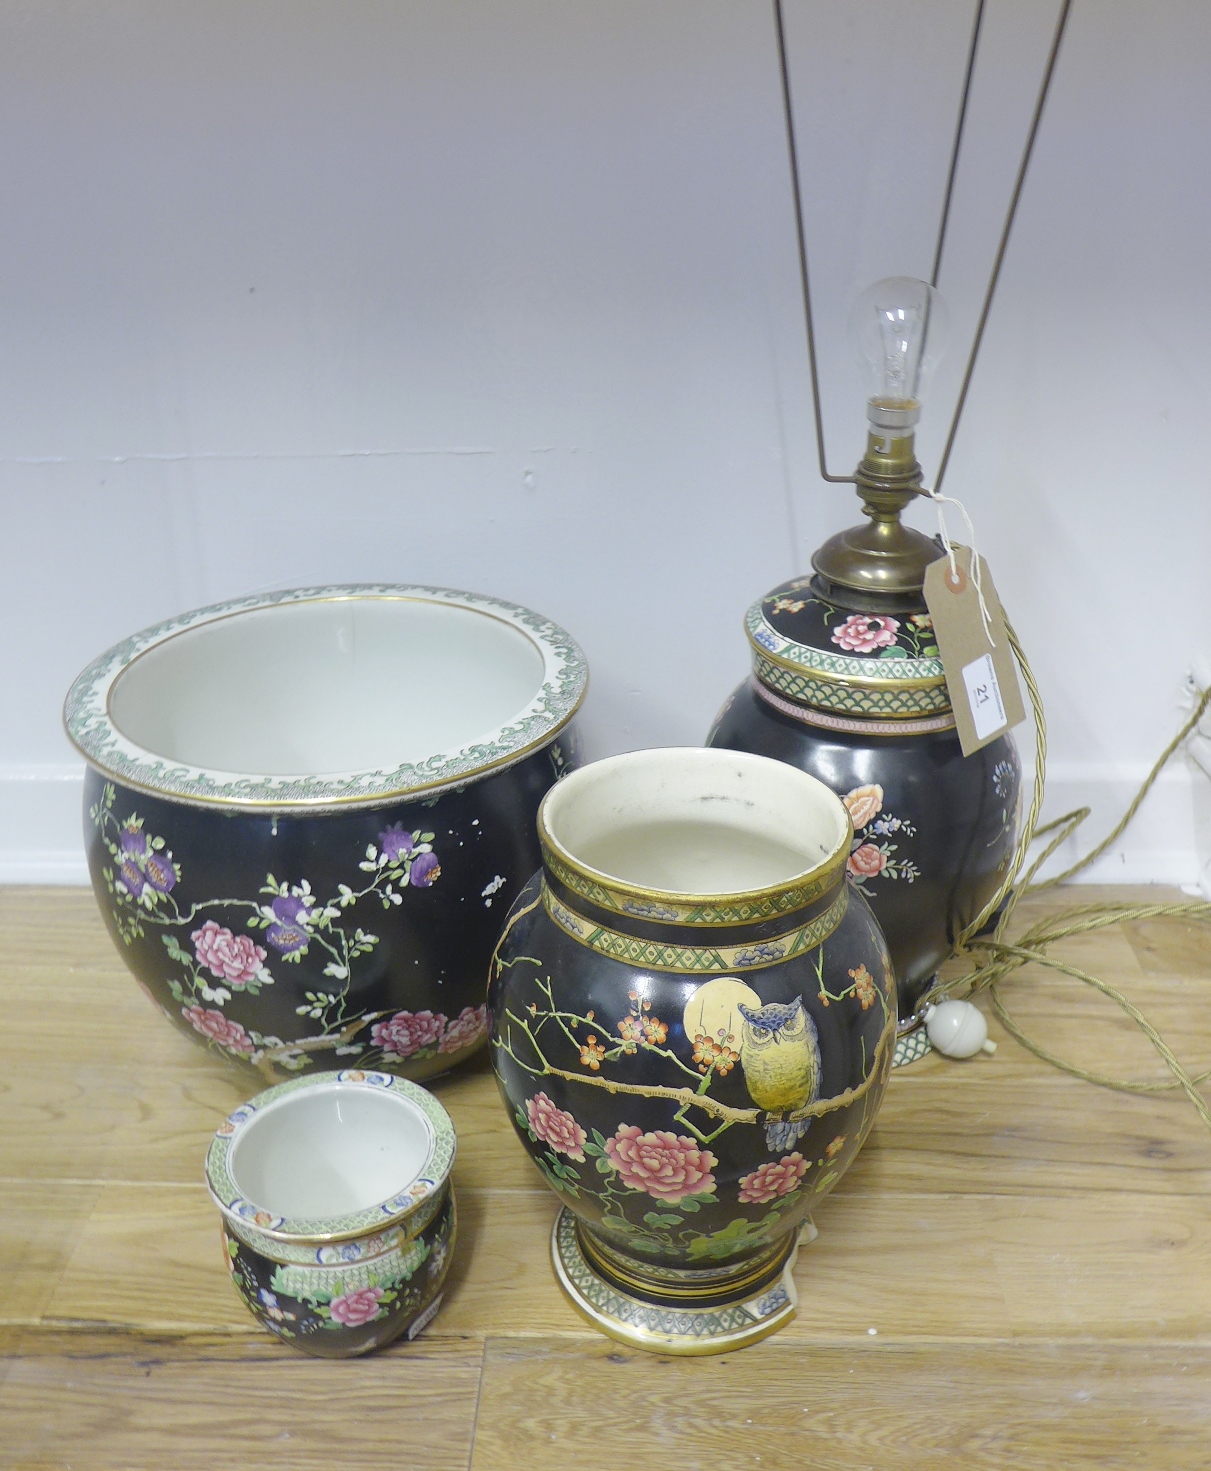 Cetem Ware black glazed and floral decorated jardiniere together with a similarly decorated table